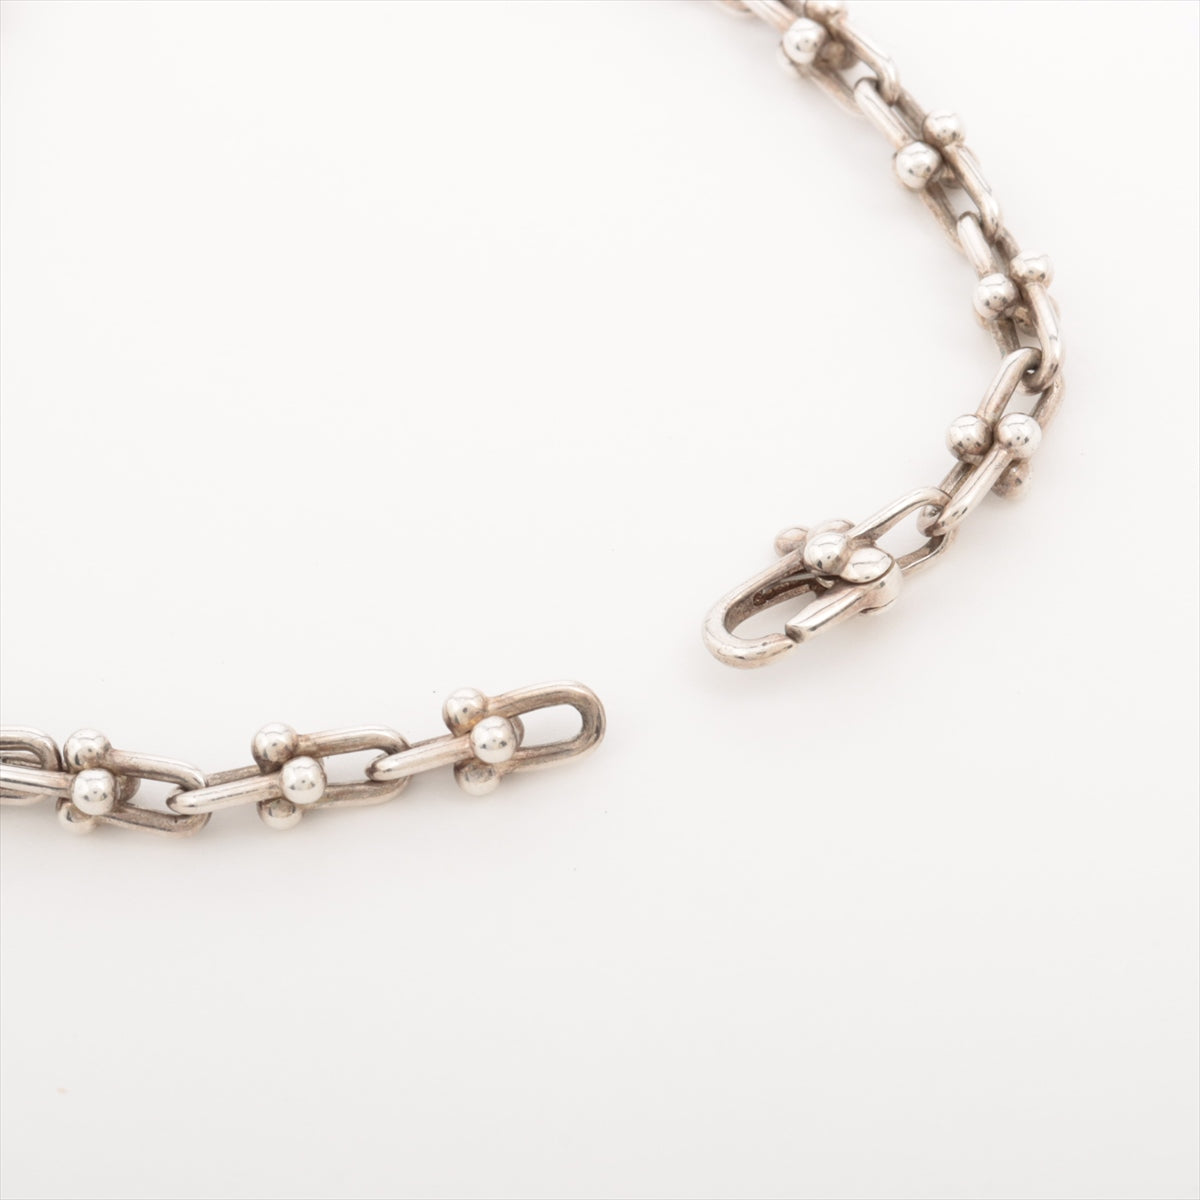 Tiffany Hardware Micro Link Bracelet 925 6.5g Silver Rubbing scratches Losing luster Stained